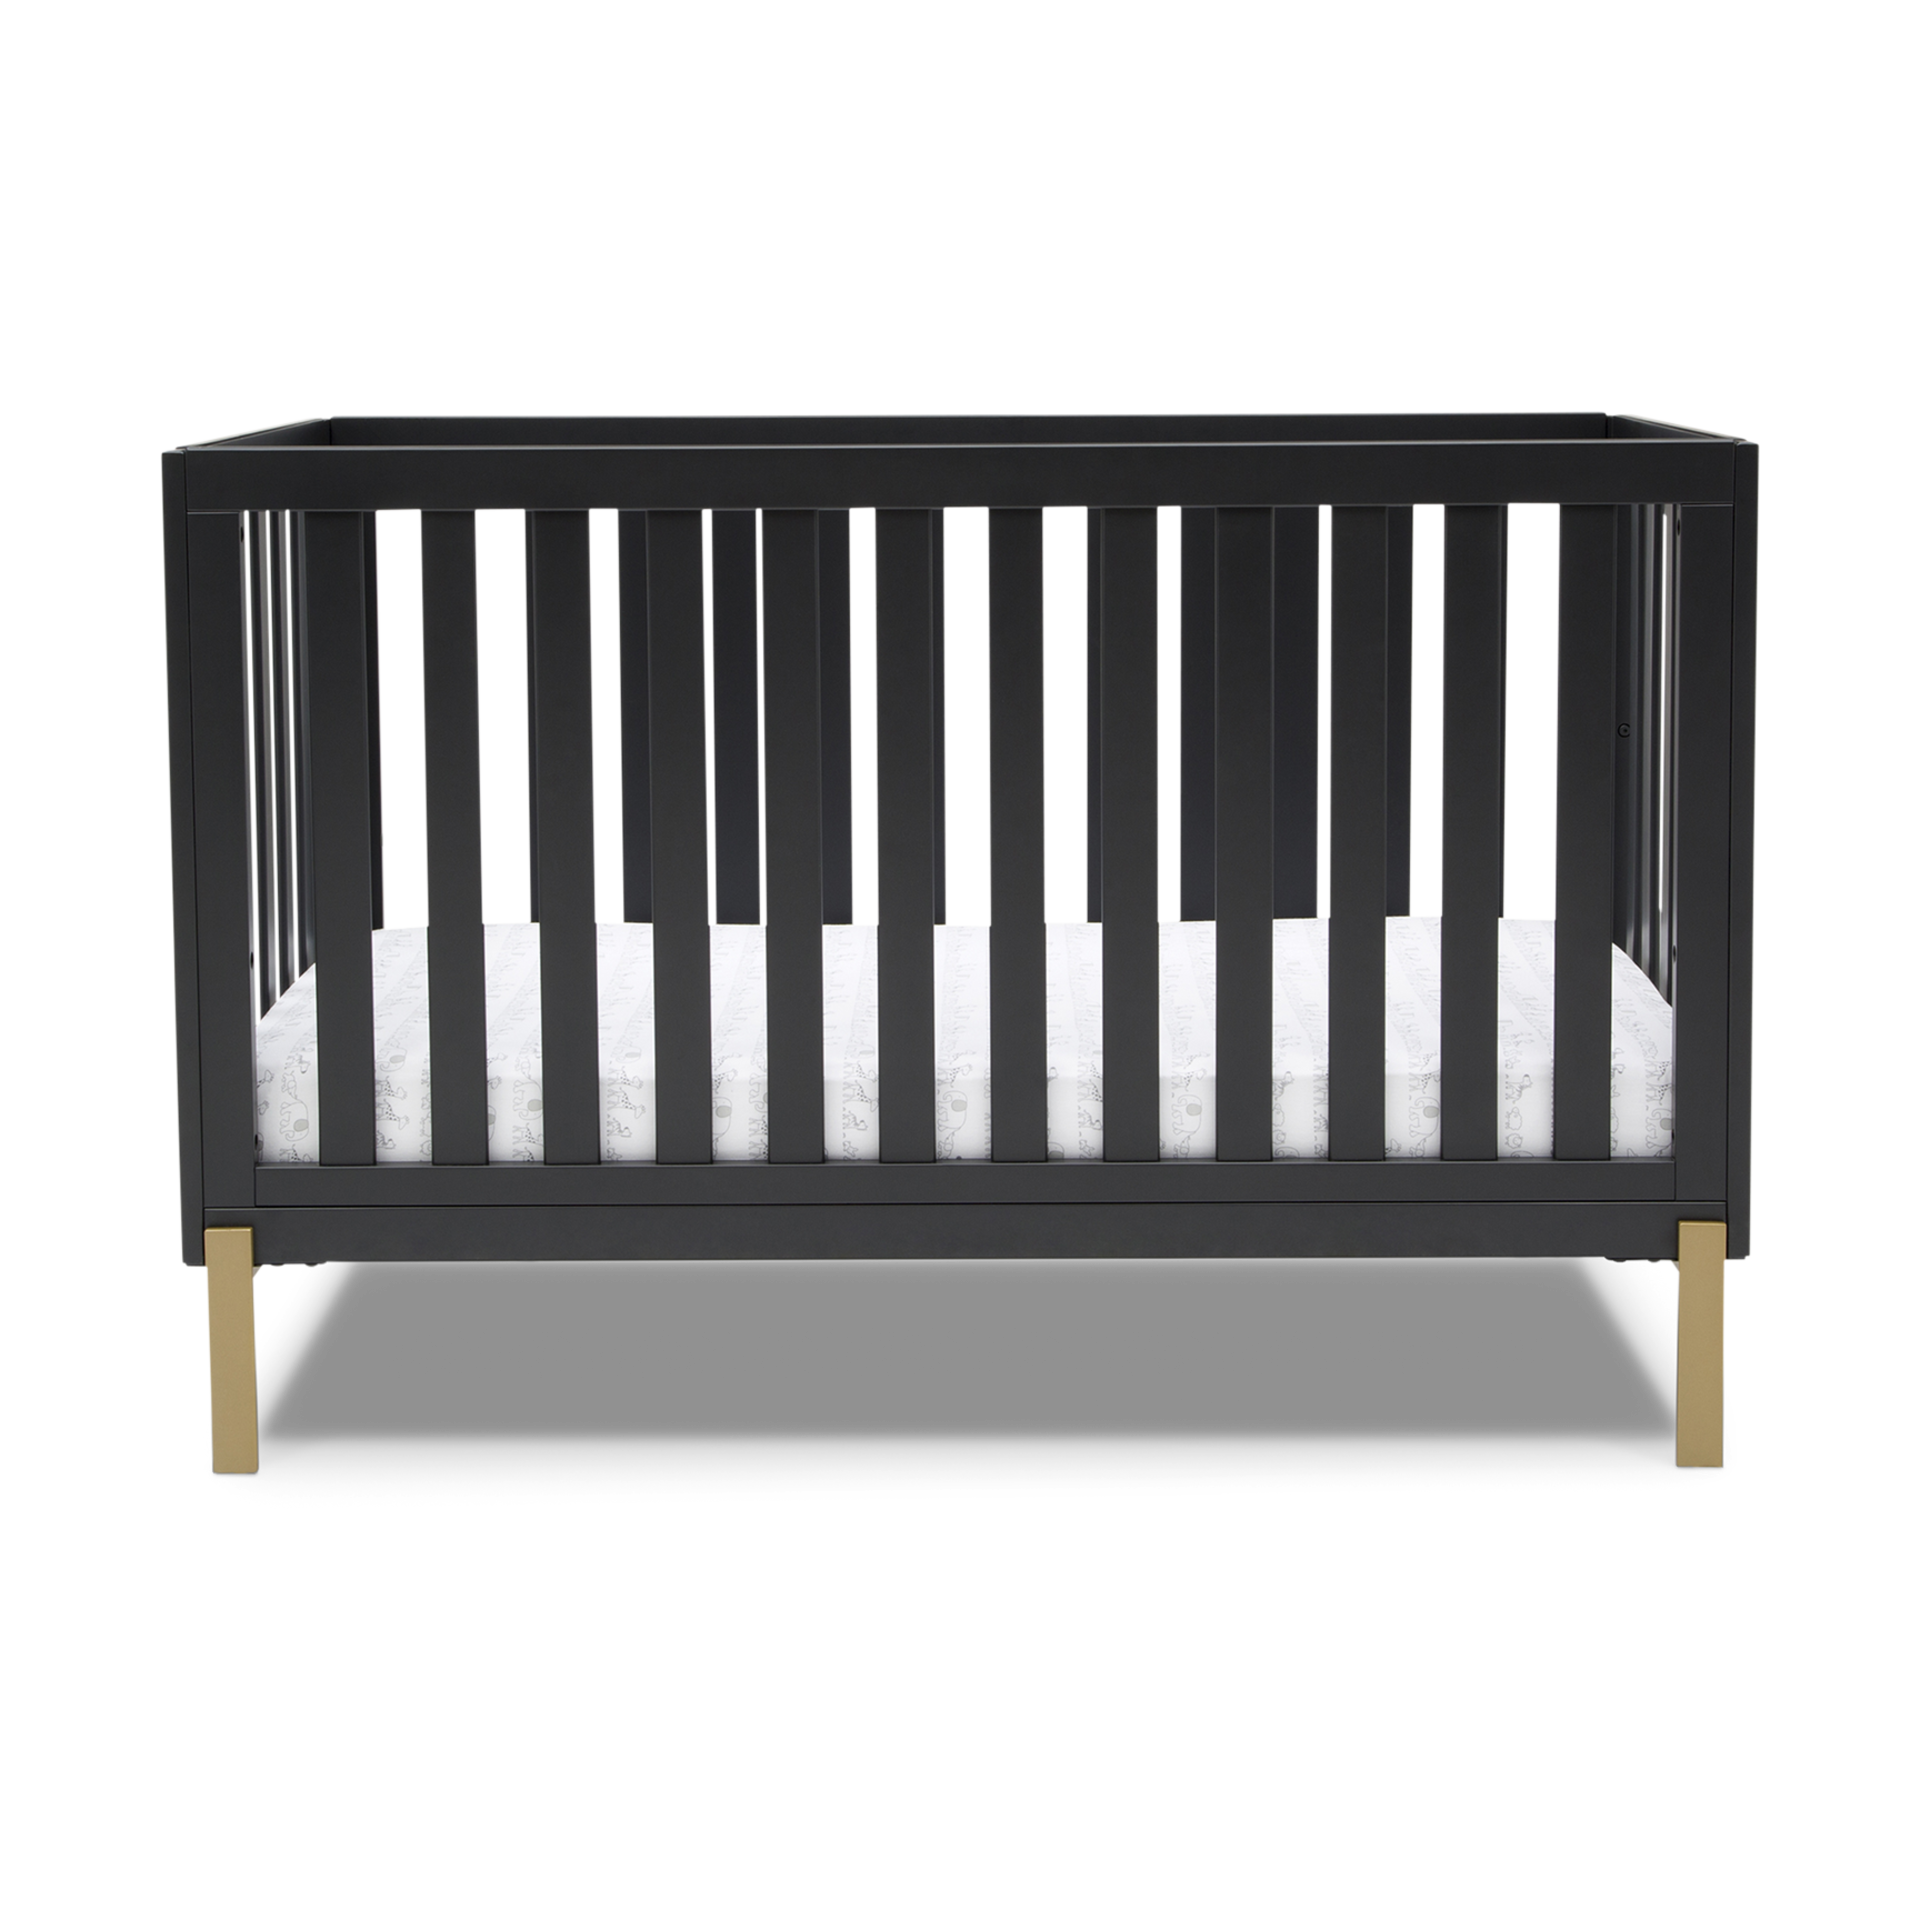 4 in one baby crib